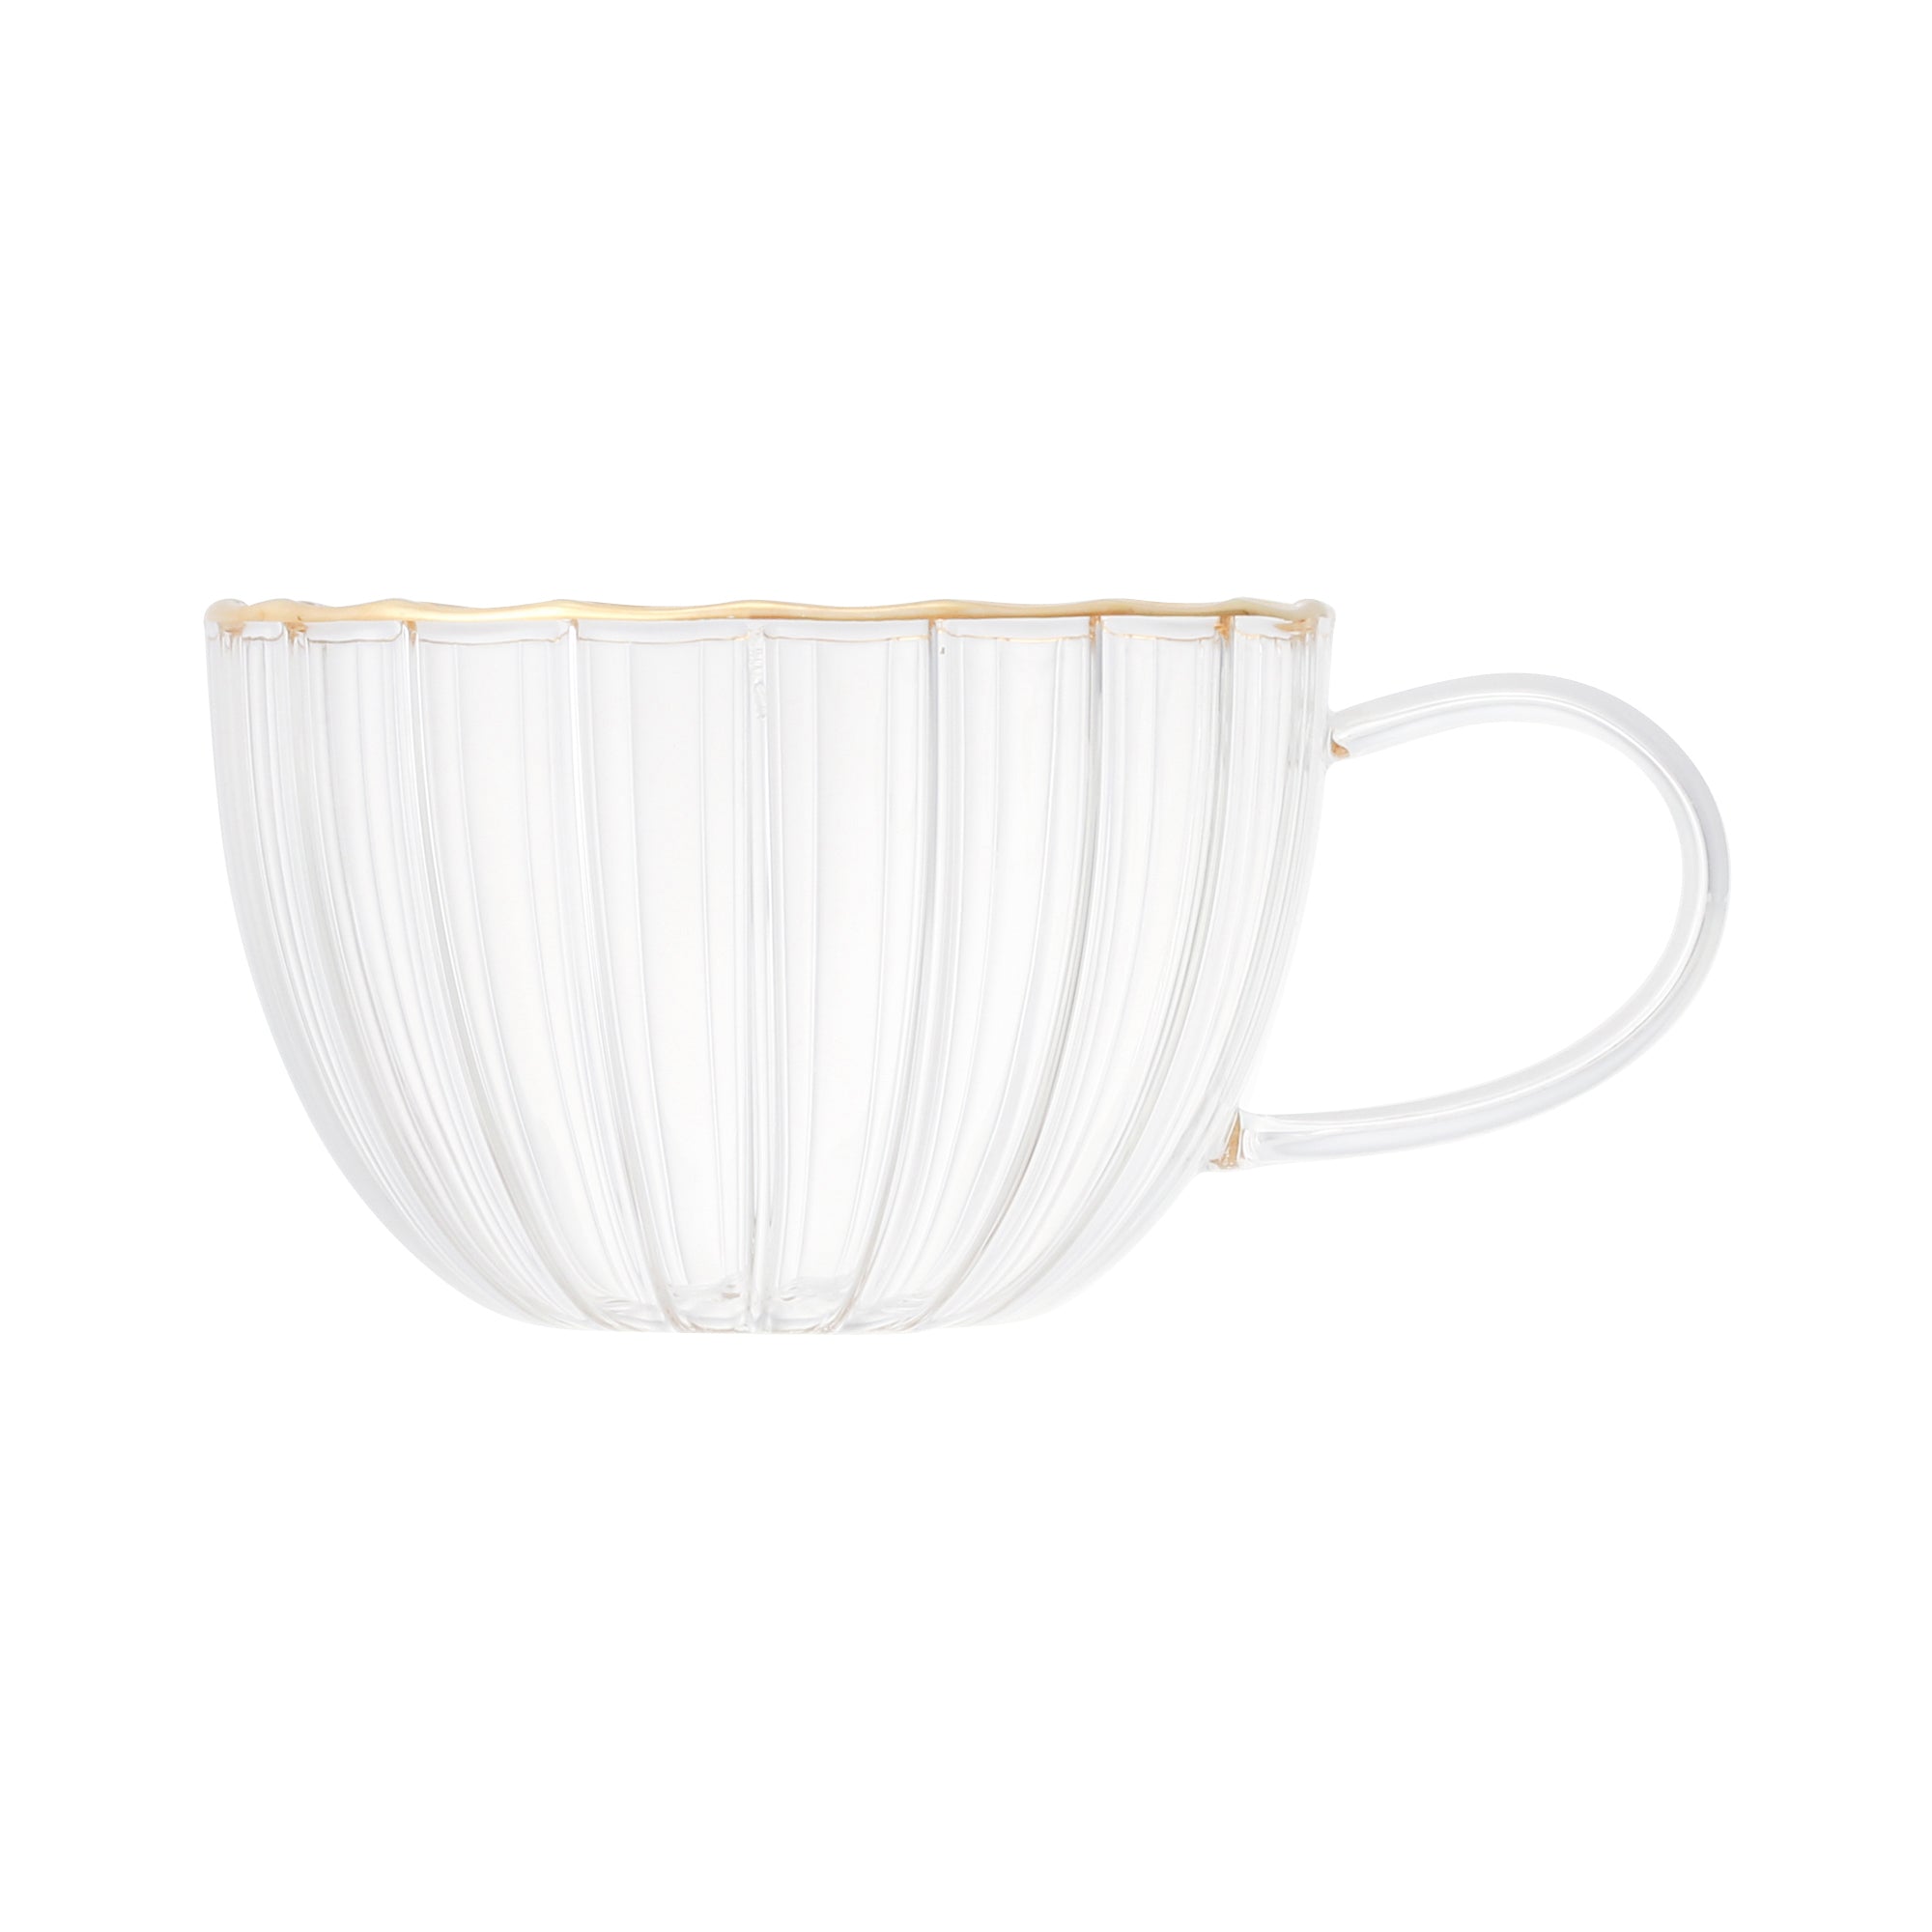 FLOWER FRILL GLASS CUP & SAUCER WHITE